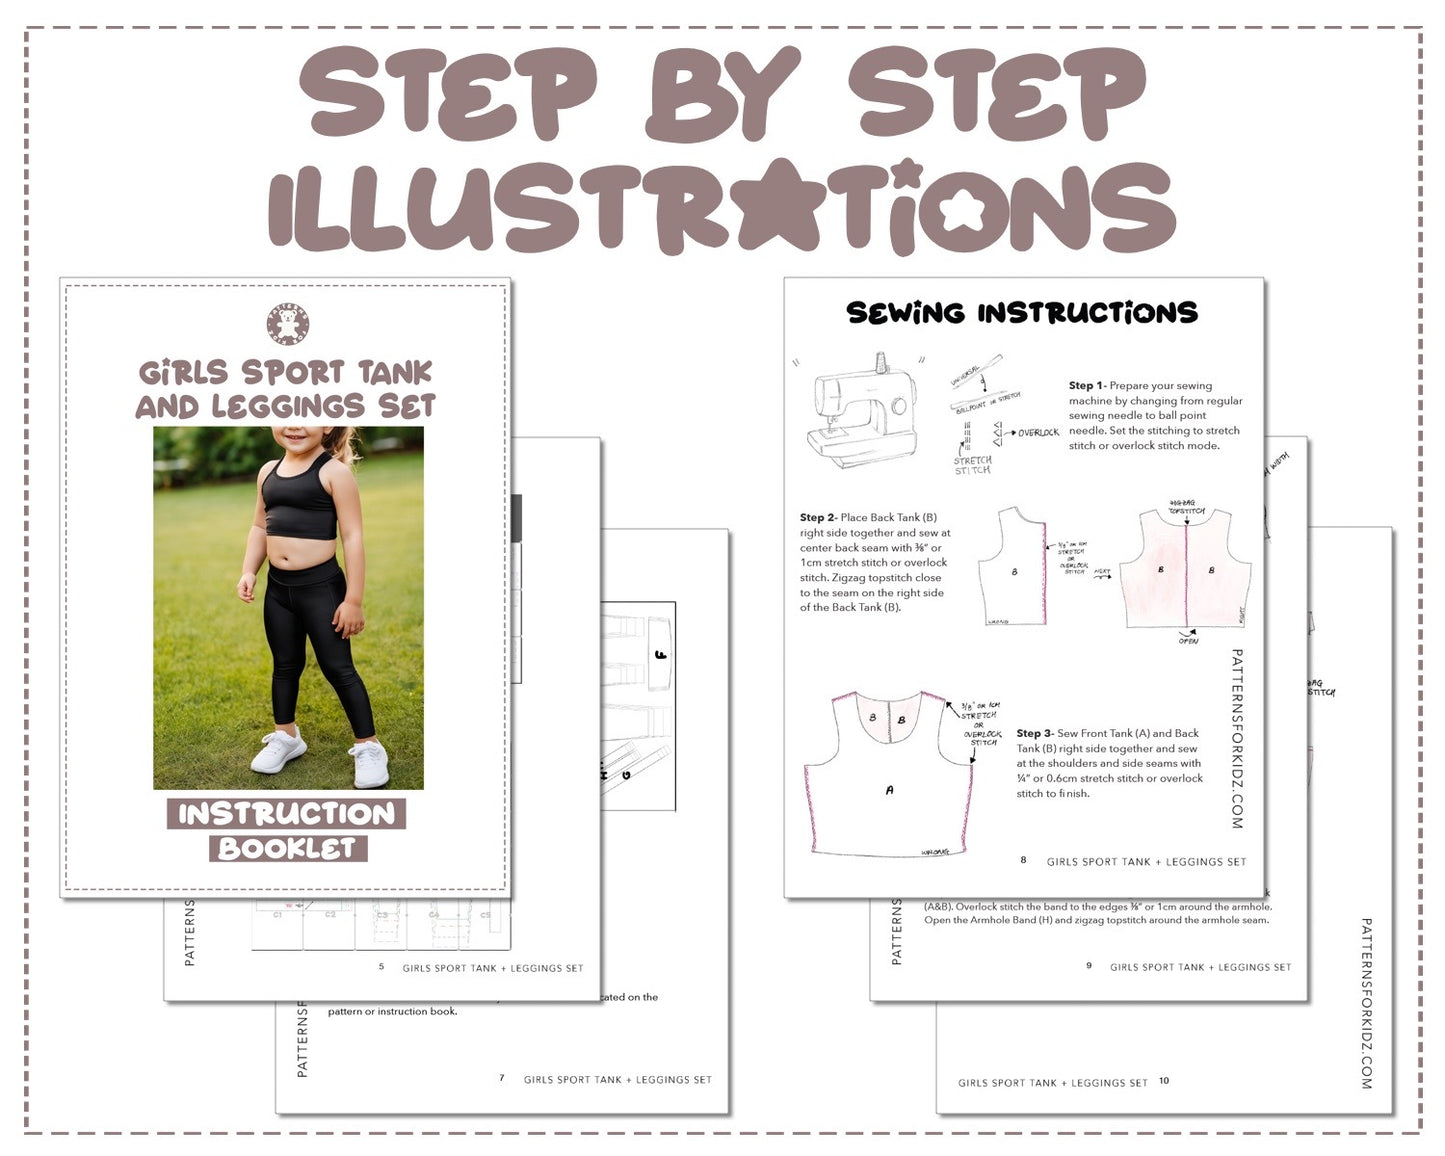 Sport Tank and Leggings Set sewing pattern step by step illustrations.